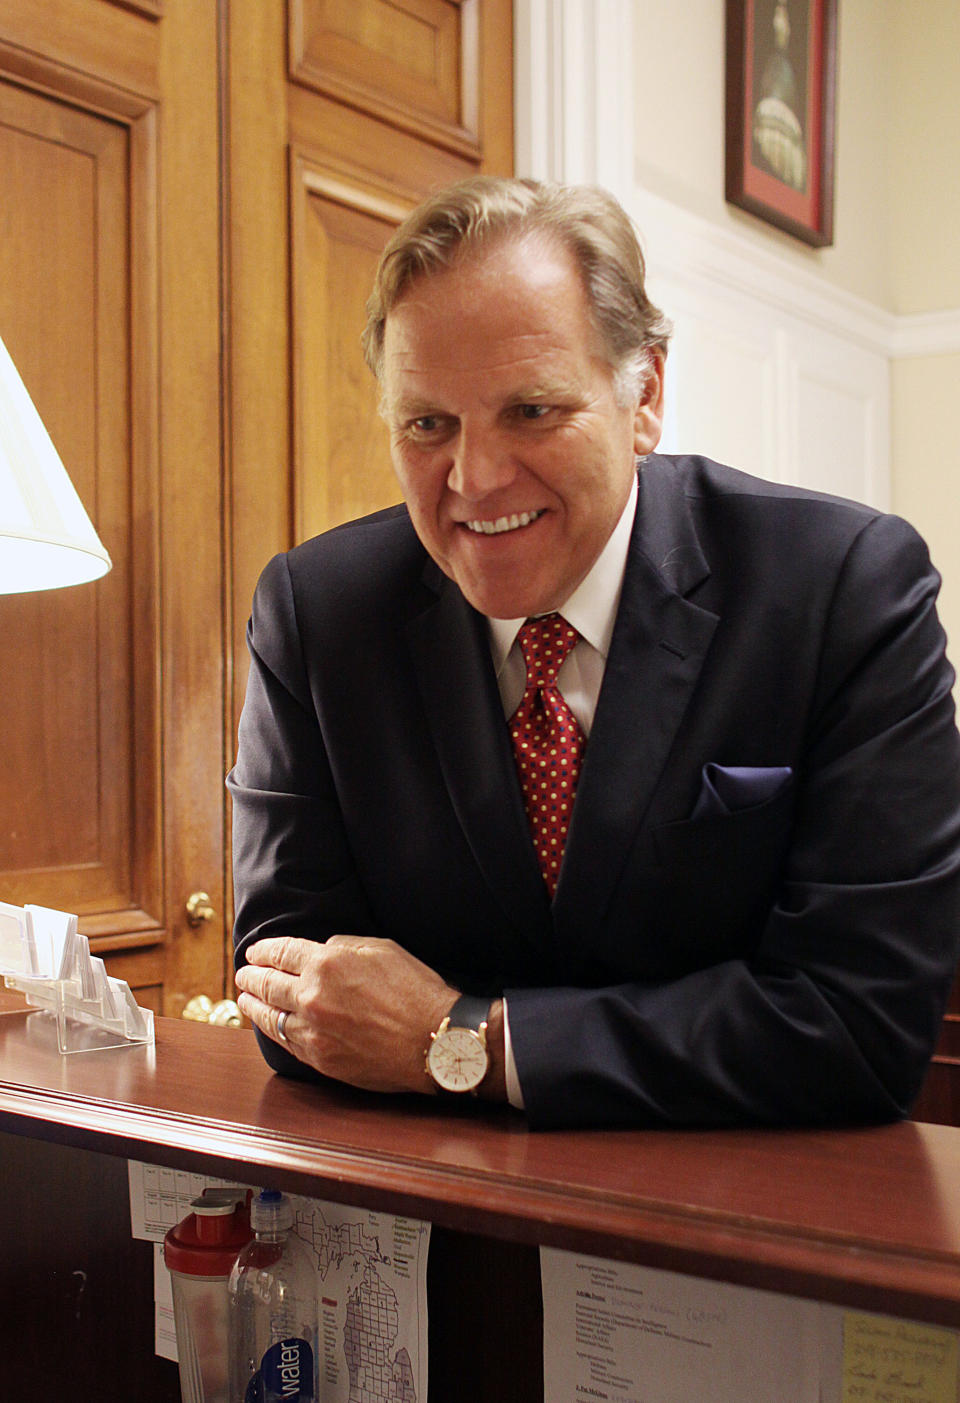 In this April 30, 2014 photo, Rep. Mike Rogers, R-Mich, smiles in his office on Capitol Hill in Washington, Wednesday, April 30, 2014. The daily radio show Rogers begins hosting in January will give the Michigan Republican practice talking to millions of Americans every day, and honing what he calls a “productive conservative” message talk radio is desperately lacking, he said. (AP Photo/Lauren Victoria Burke)